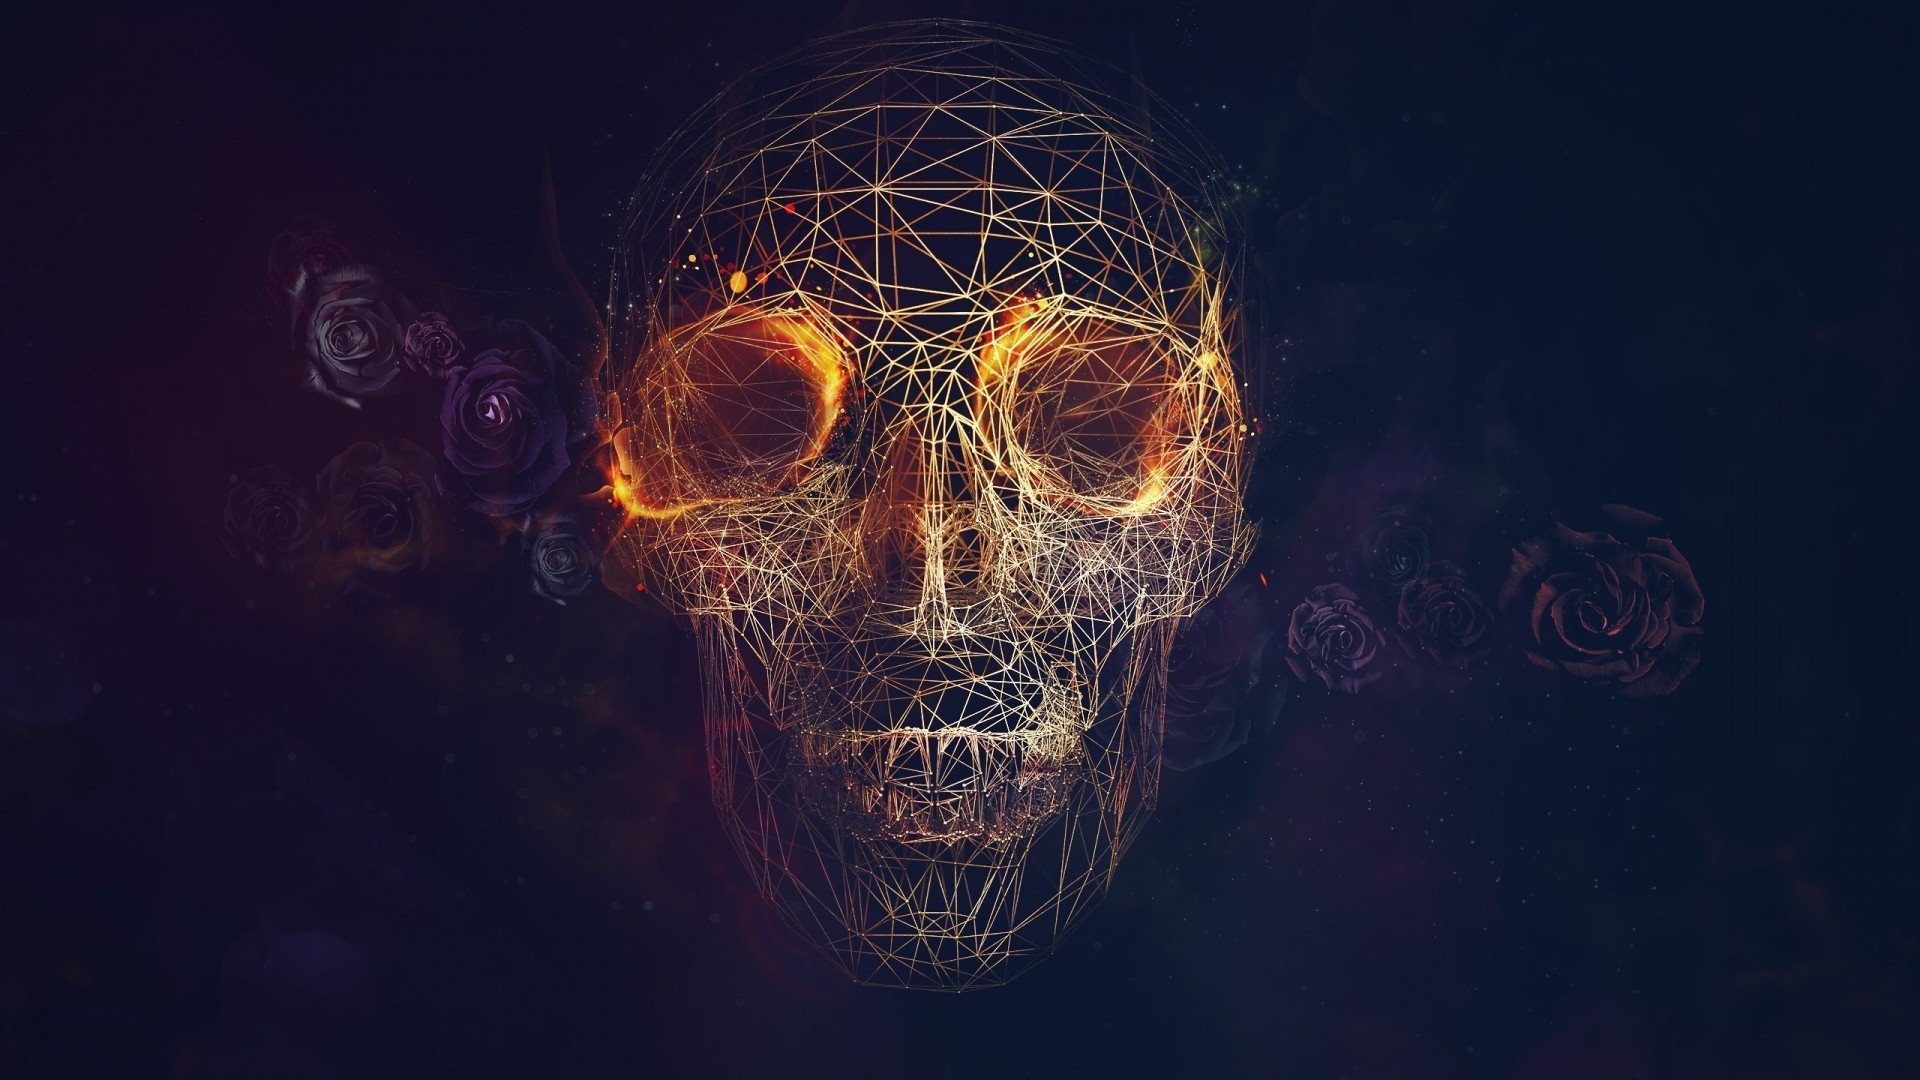 Wireframe, CGI, Skull, Fire, Rose, Vectors, Lines, Blue Background Wallpapers HD / Desktop and Mobile Backgrounds